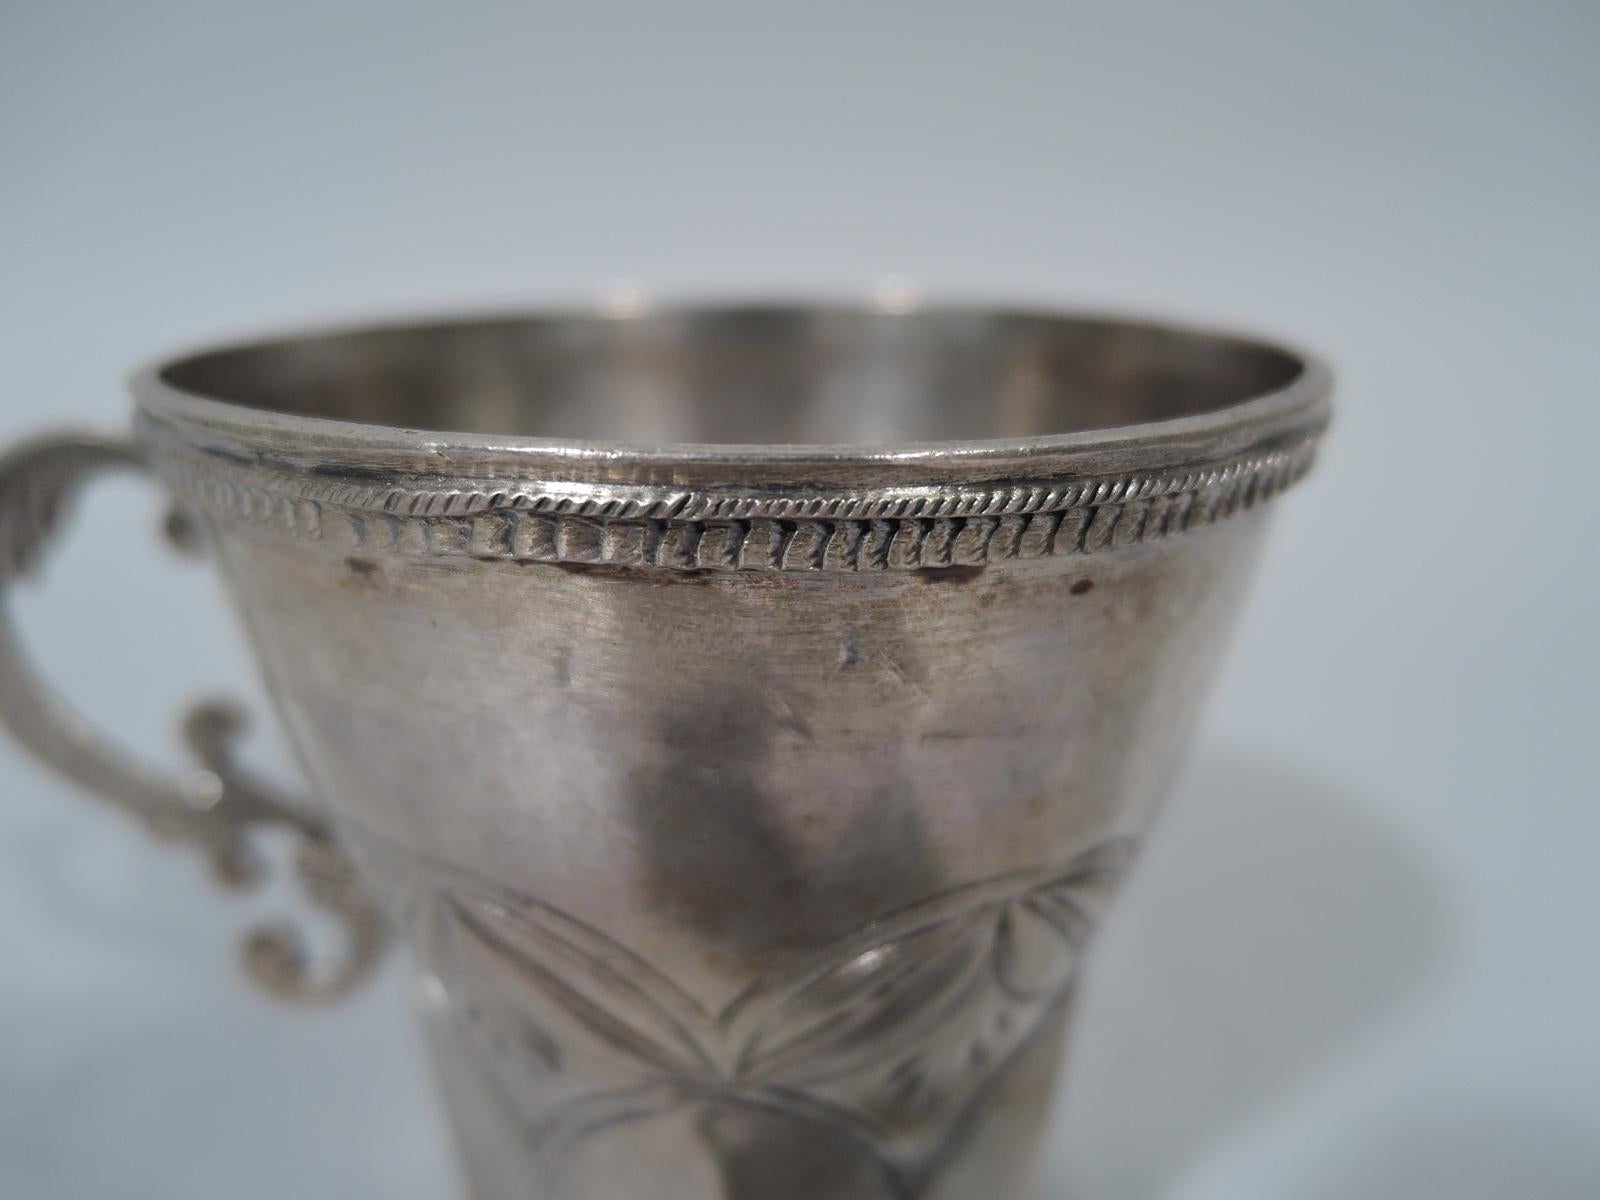 South American silver mug, 19th century. Curved top and faceted bottom with tooled arcade-inset lozenge border. Fancy leaf-capped S-scroll handle. Dentil rim borders. Unmarked. Weight: 3.8 troy ounces.